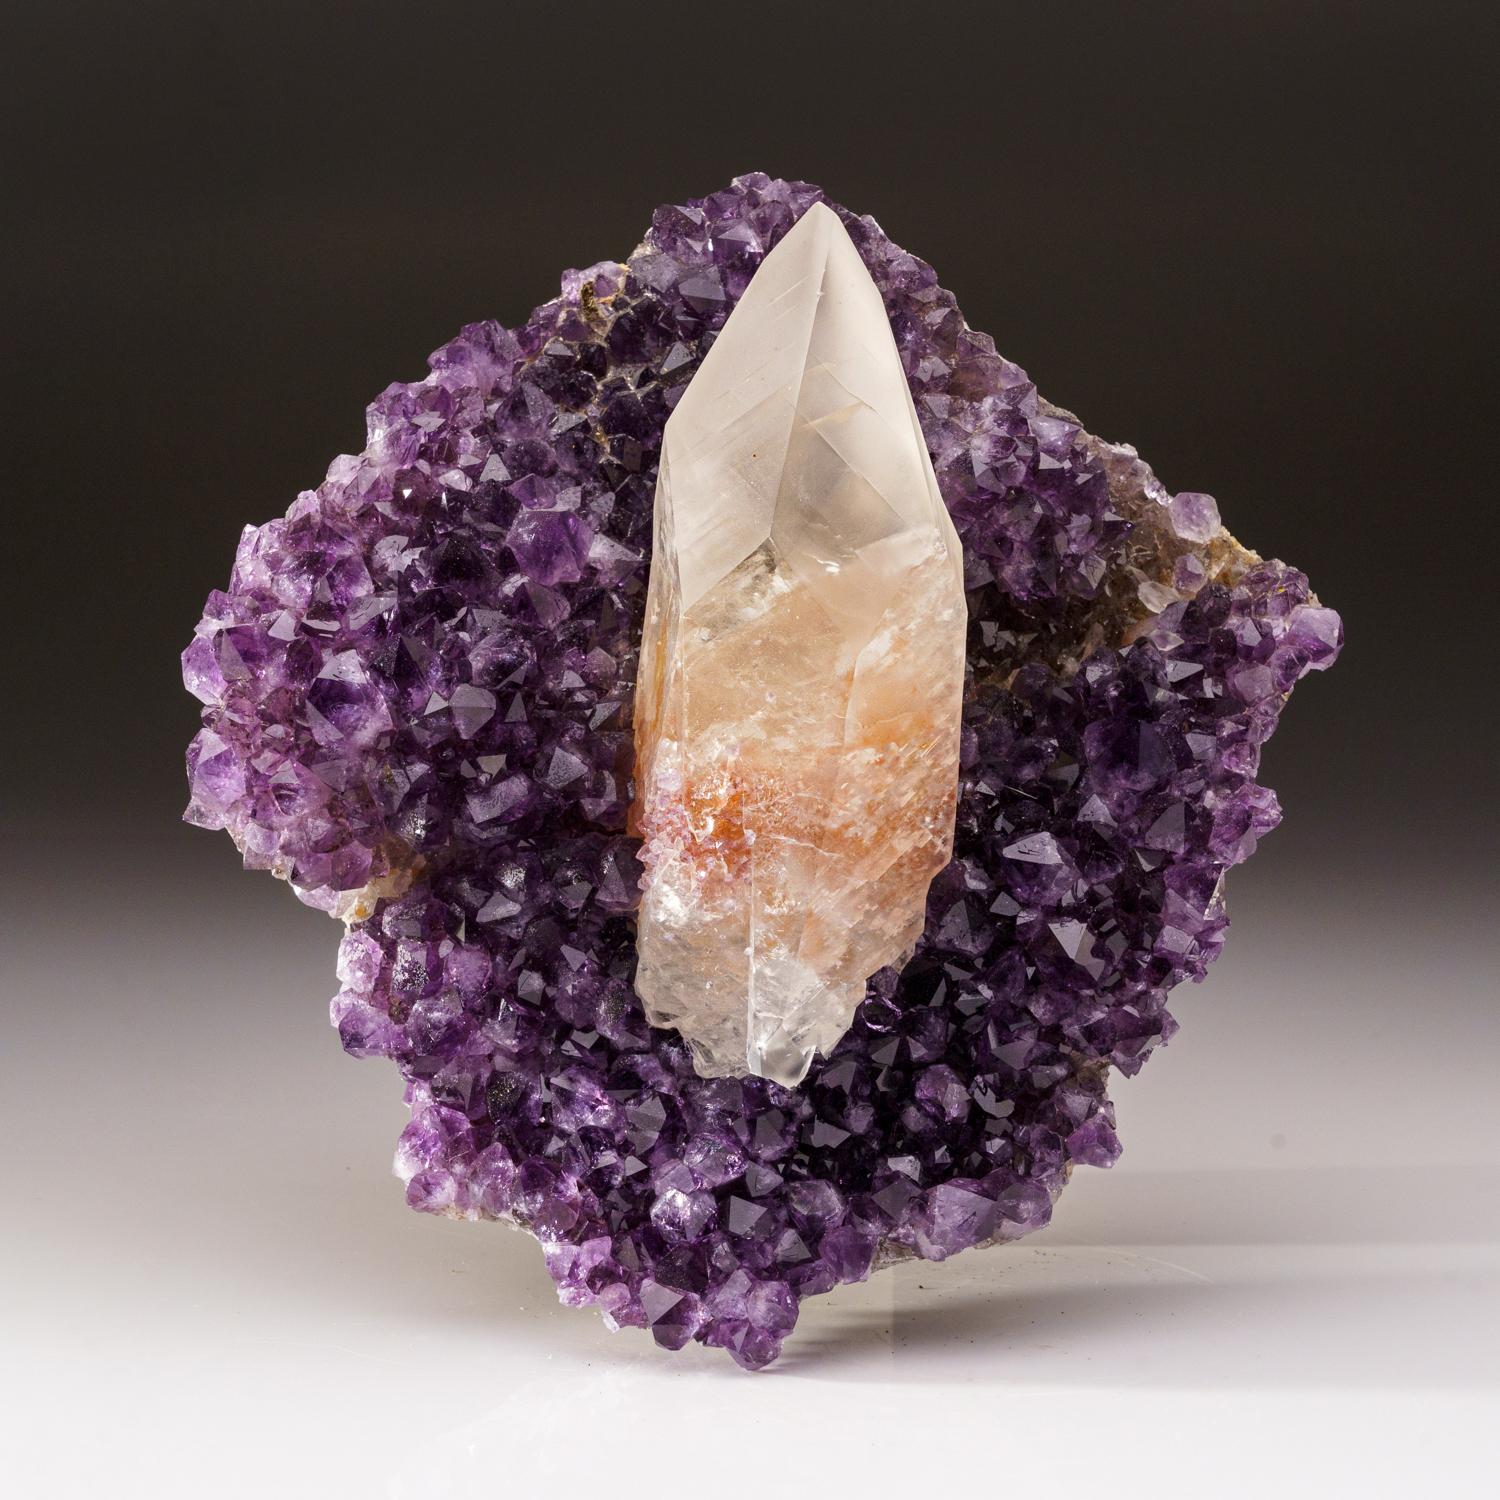 From San Eugenio, Artigas Dept., Uruguay

Large 6'' sharp scalenohedral crystal of Calcite centered on matrix of grape purple translucent to transparent top-quality Uruguayan Amethyst. This piece is in supreme condition and is a top collectable